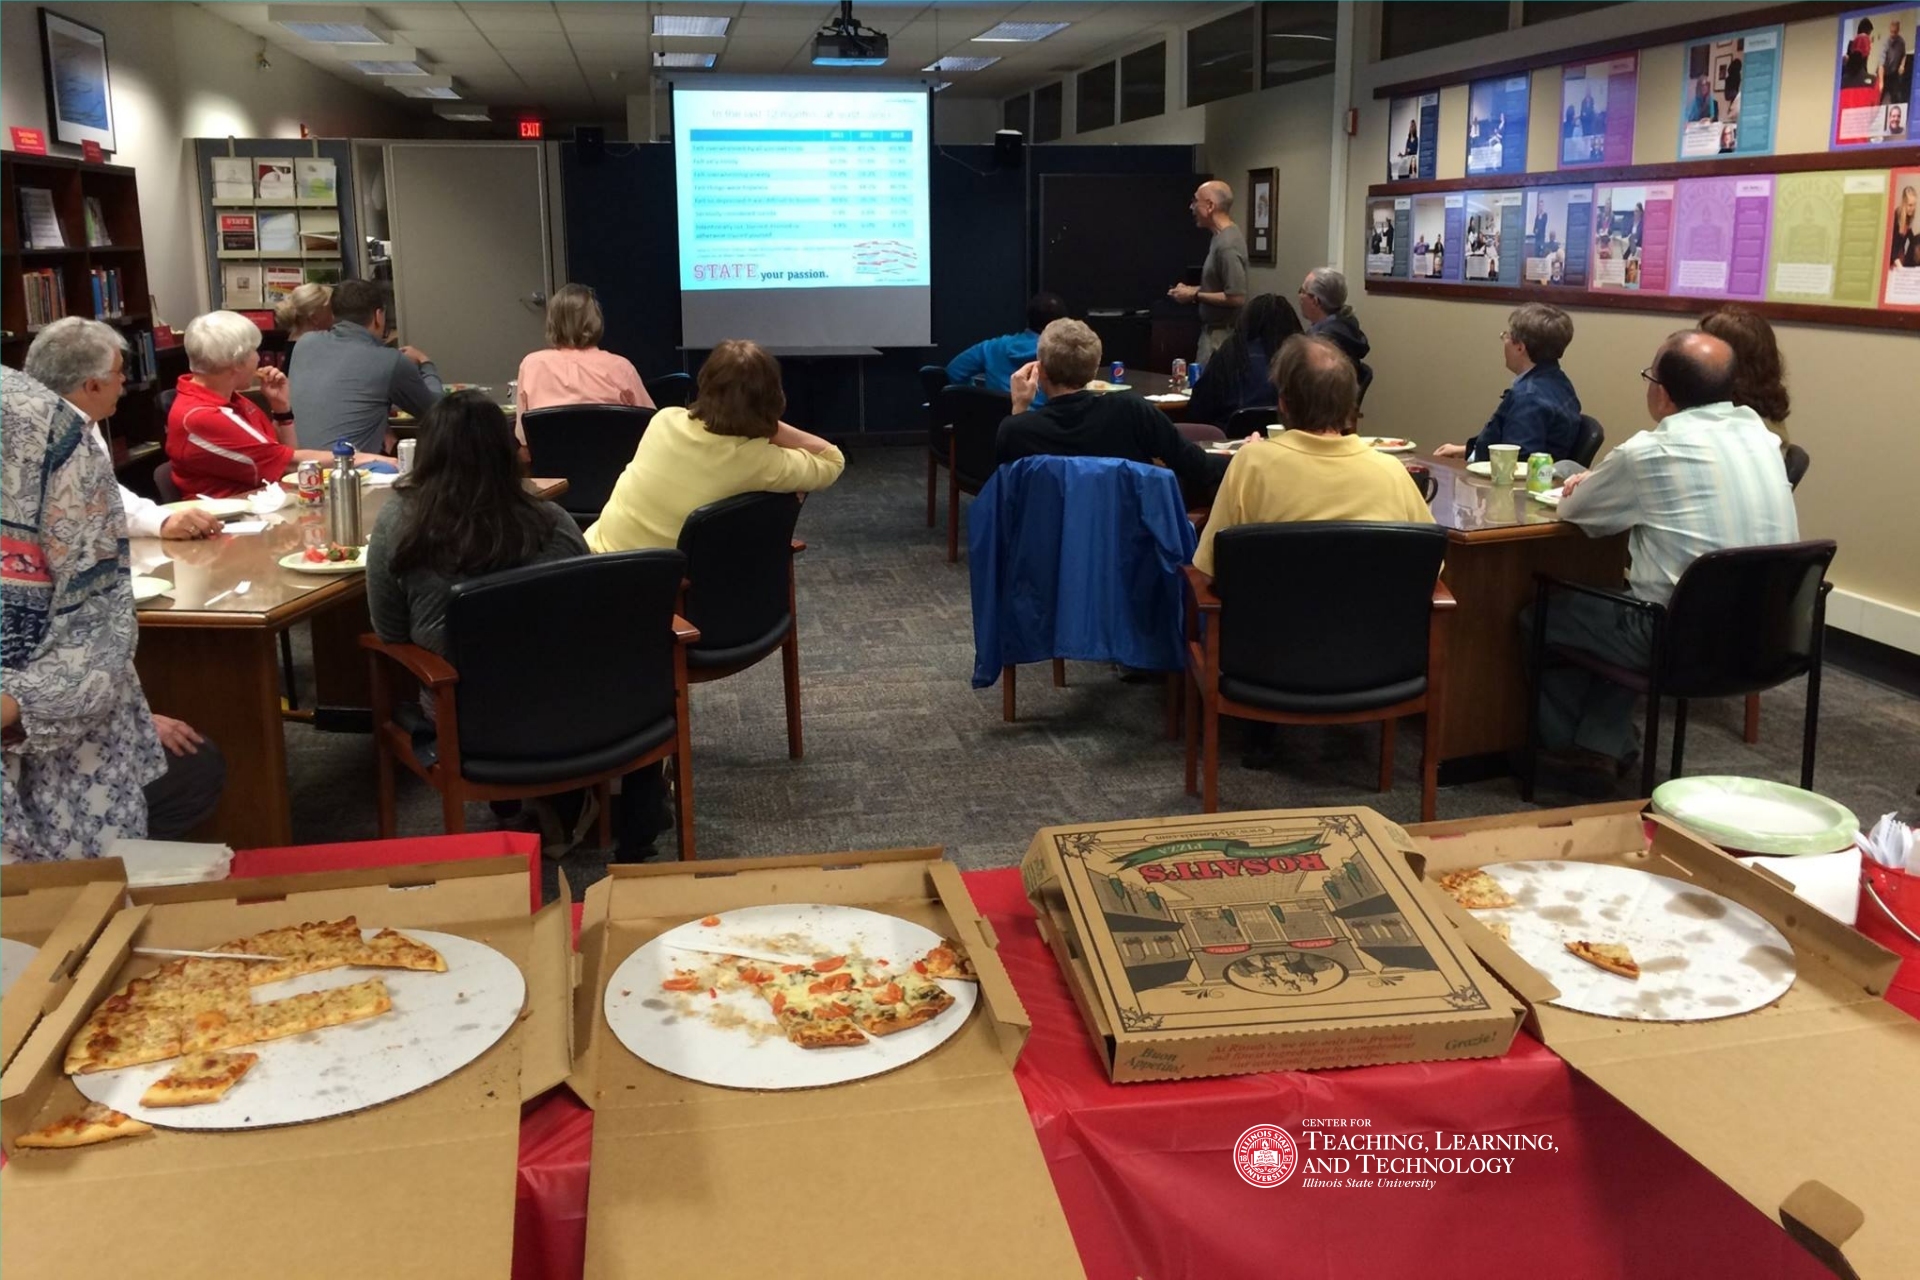 Faculty and staff in a workshop with pizza!